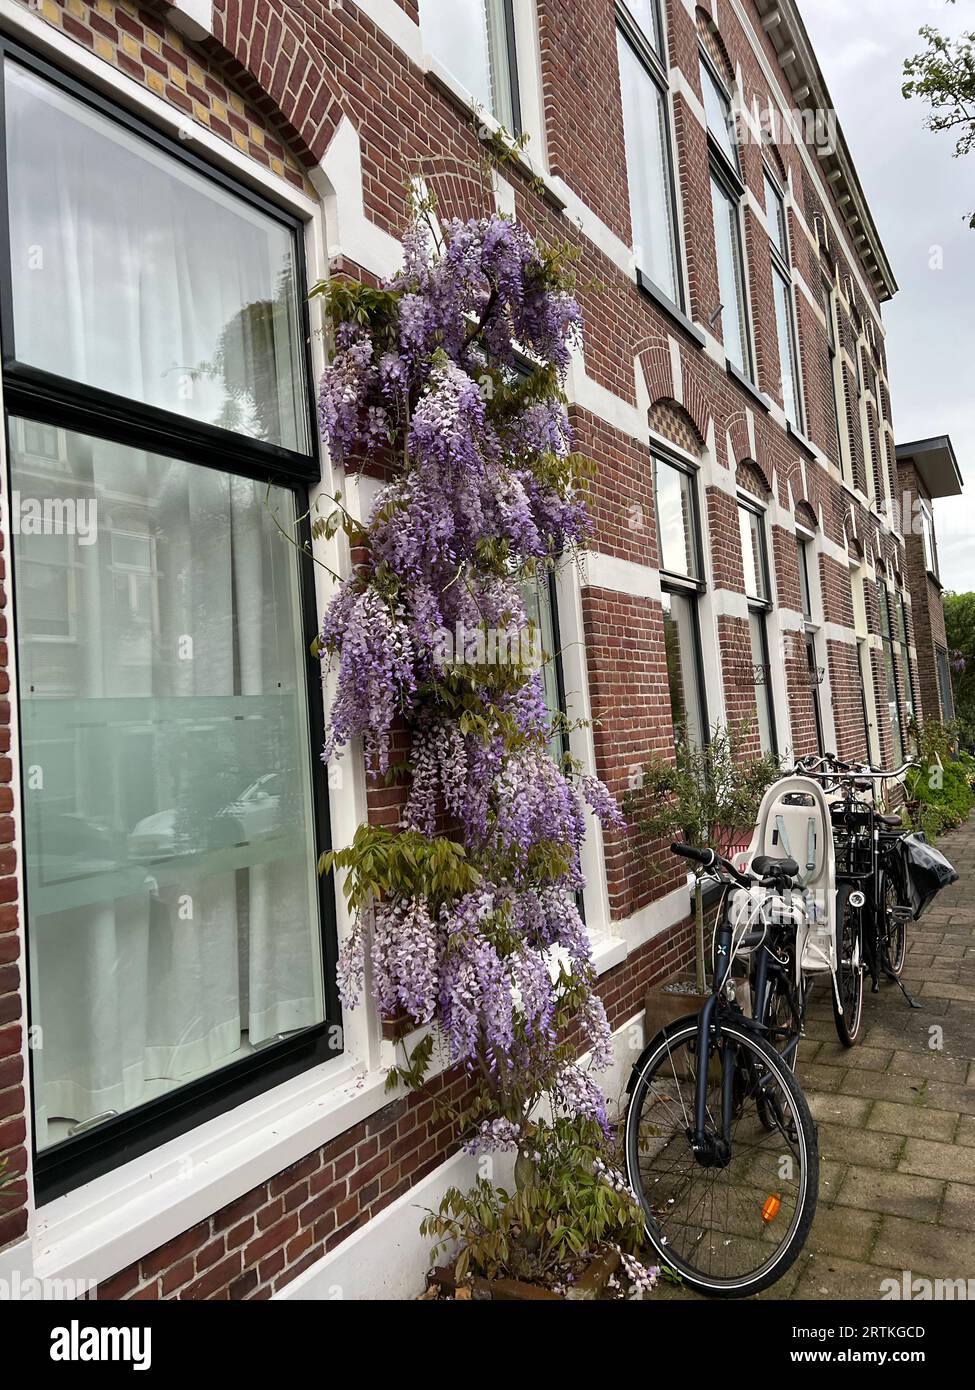 Beautiful aromatic wisteria vine growing on building outdoors Stock Photo